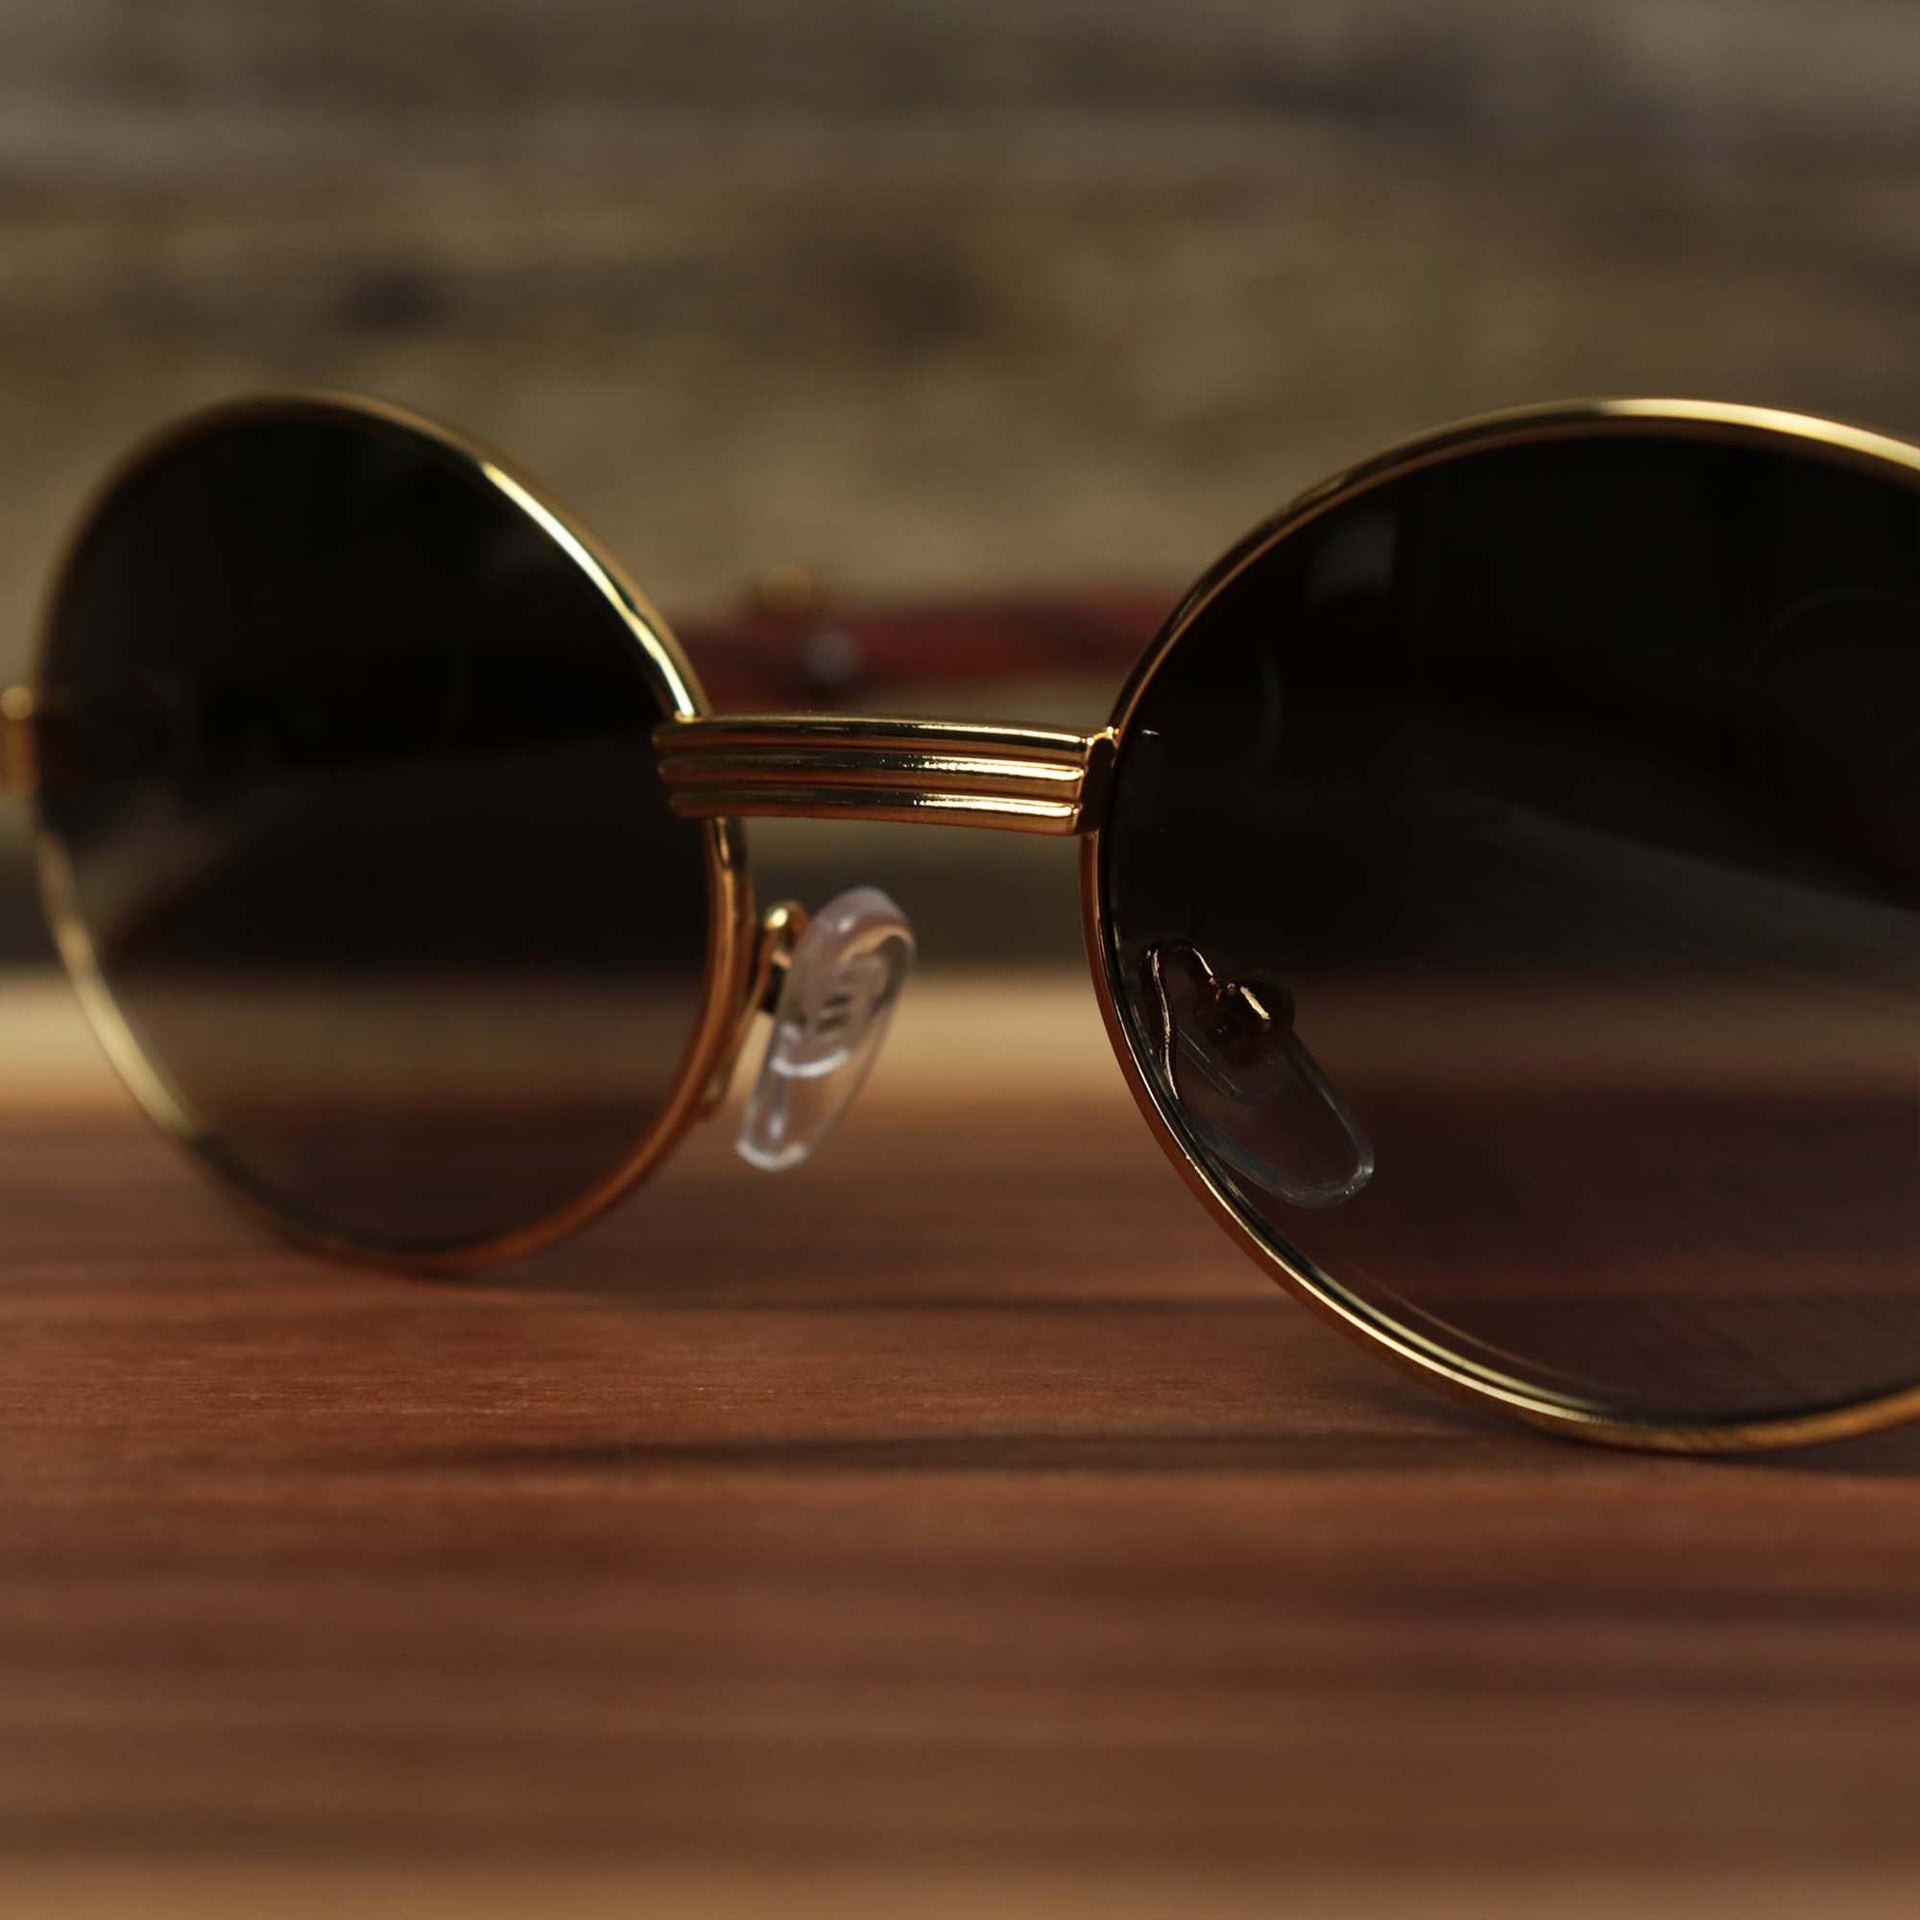 The bridge on the Oval 3 Row Frame Black Lens Sunglasses with Gold Frame